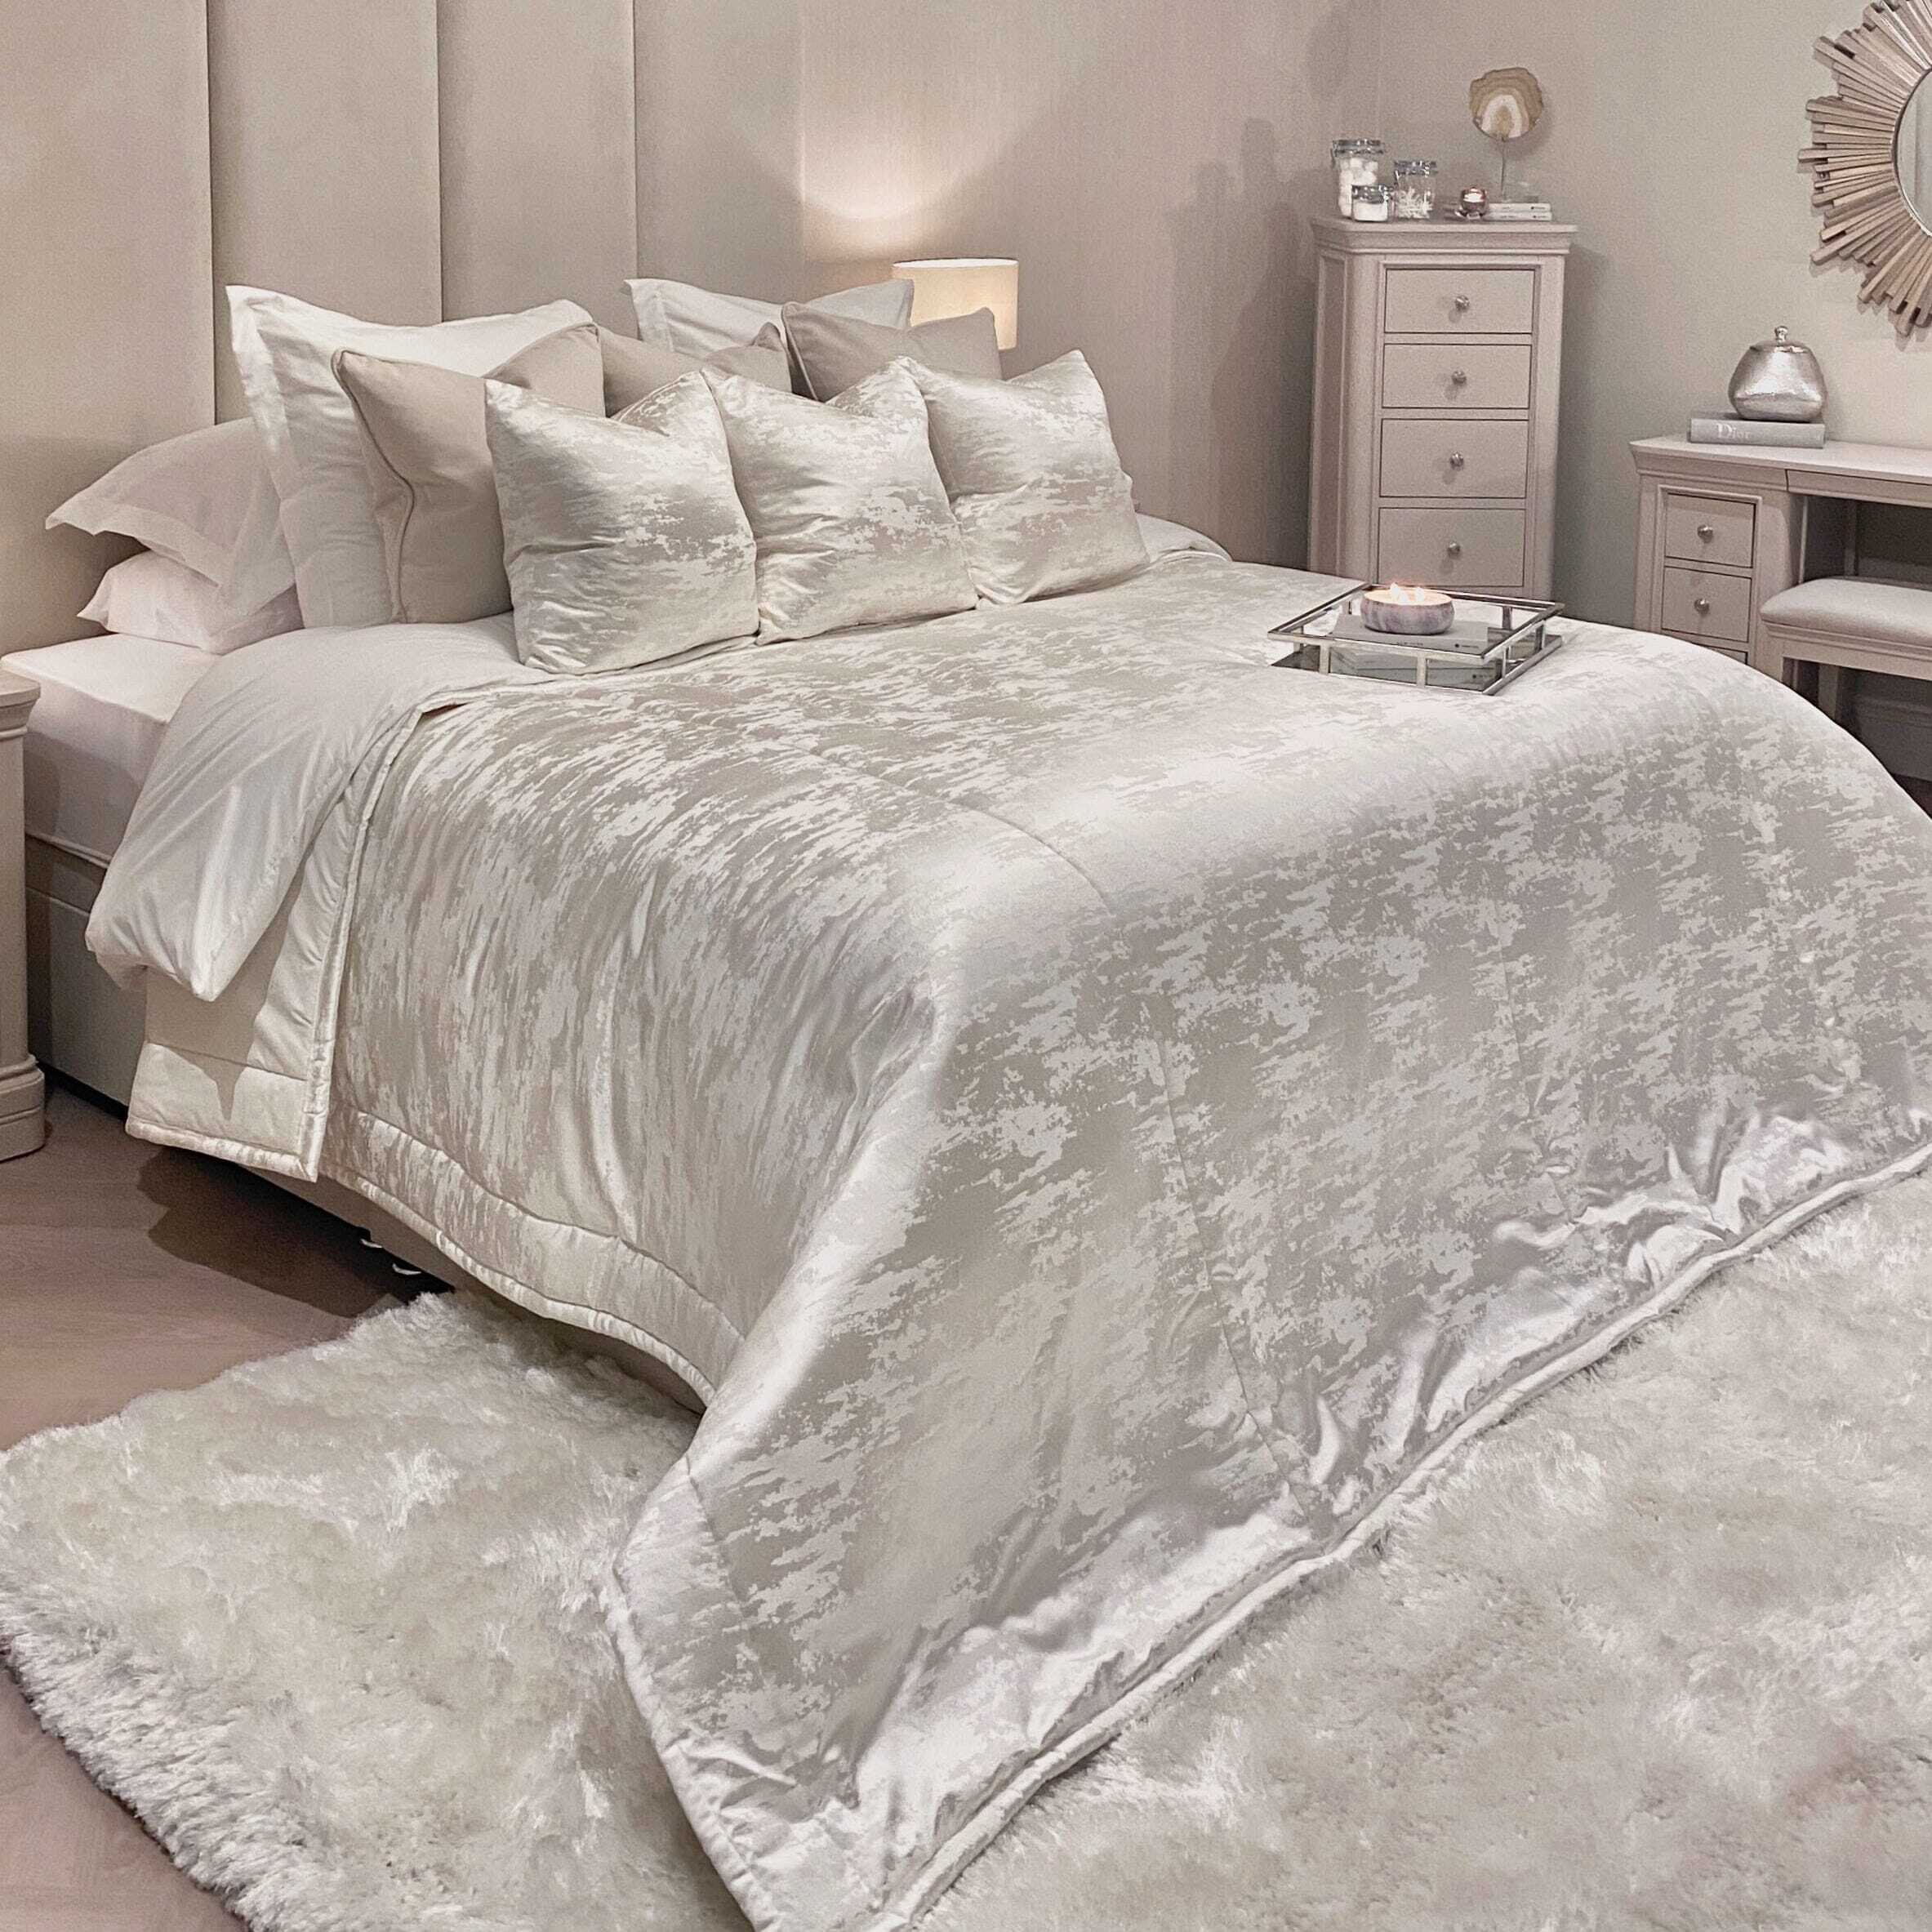 Hailes Pearl Satin Mix Marble Effect Bedspread, Super King